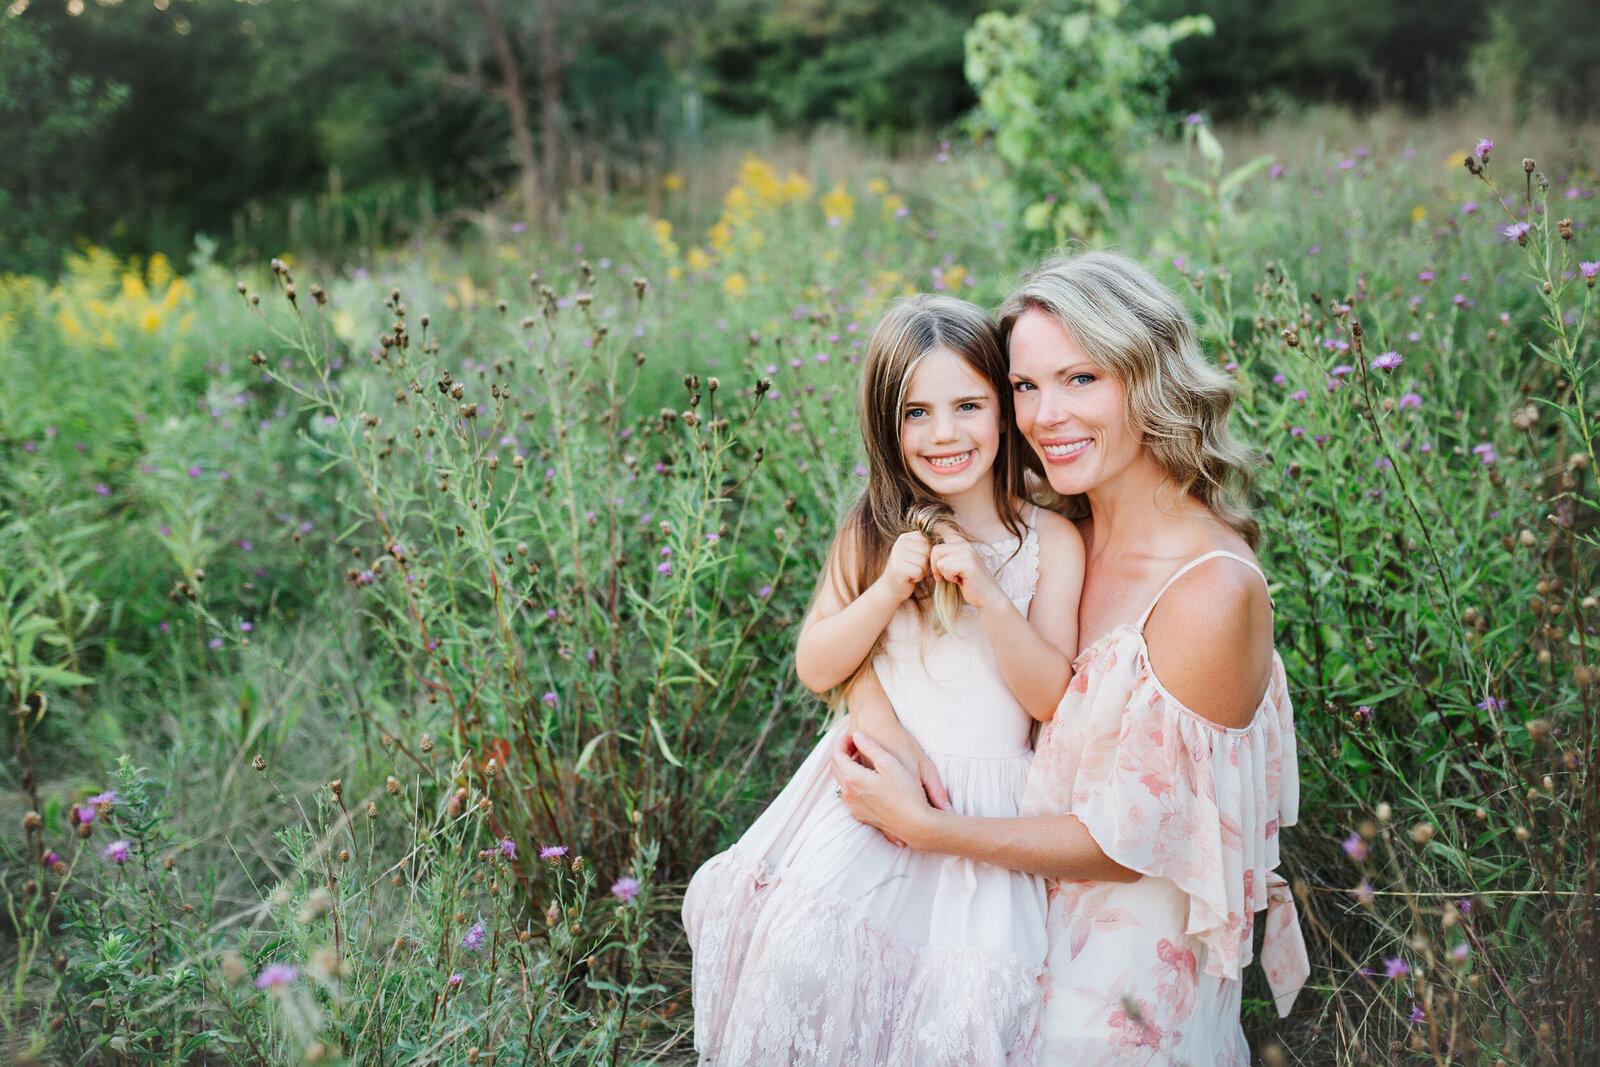 Mother and daughter snuggle in the tall grassy field